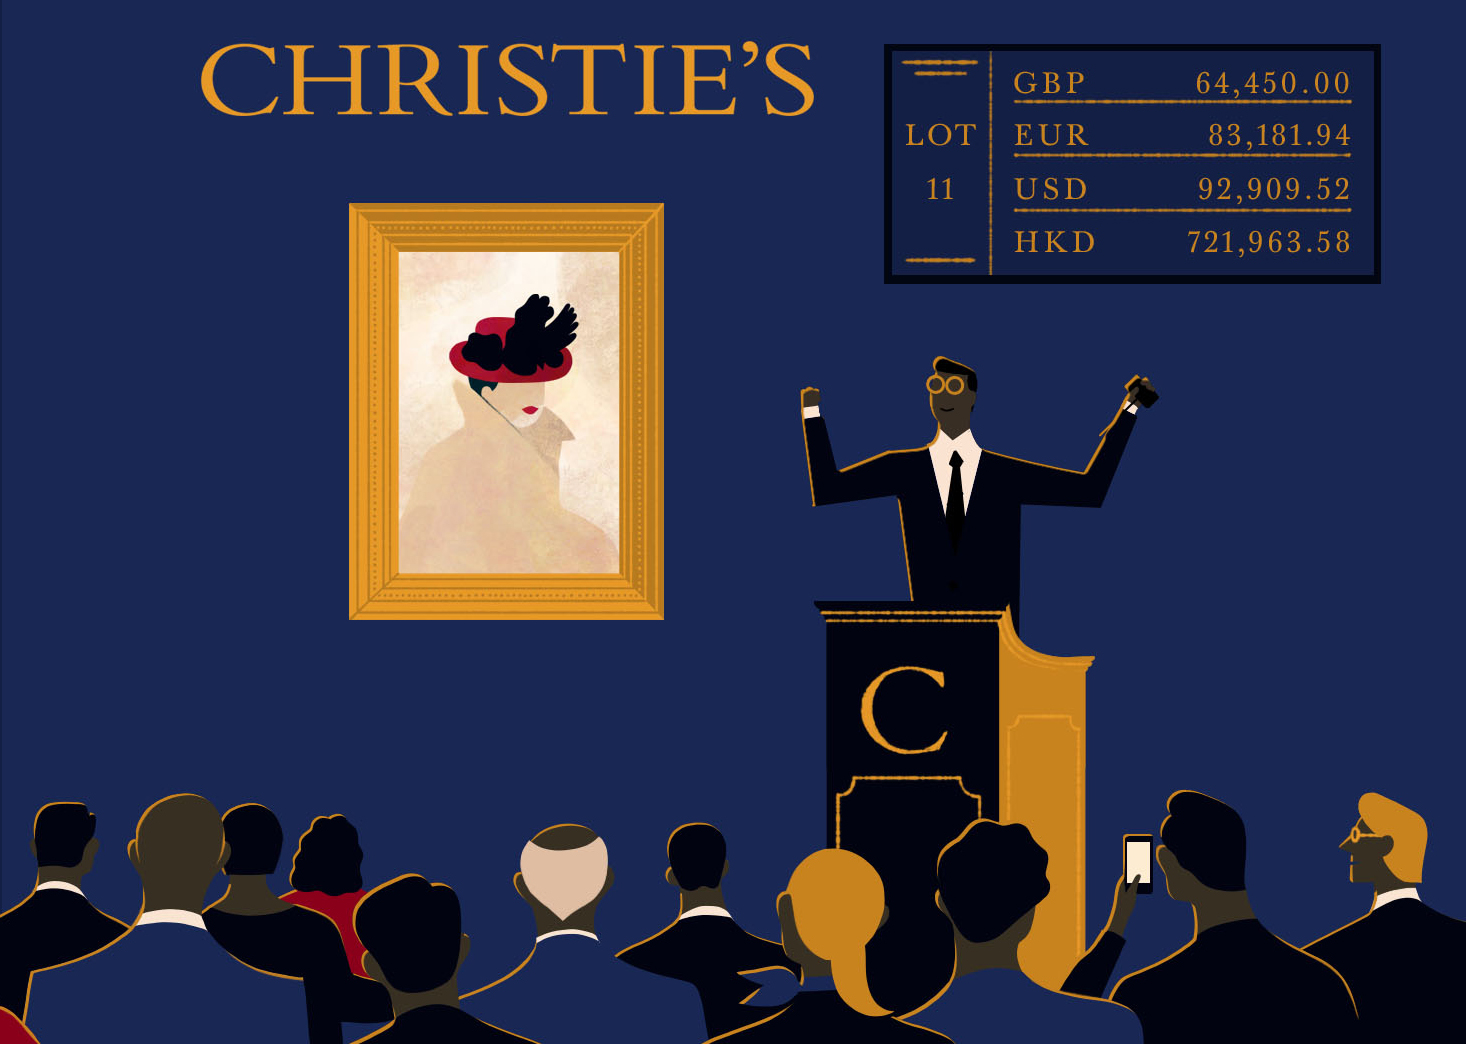 Christies auction image